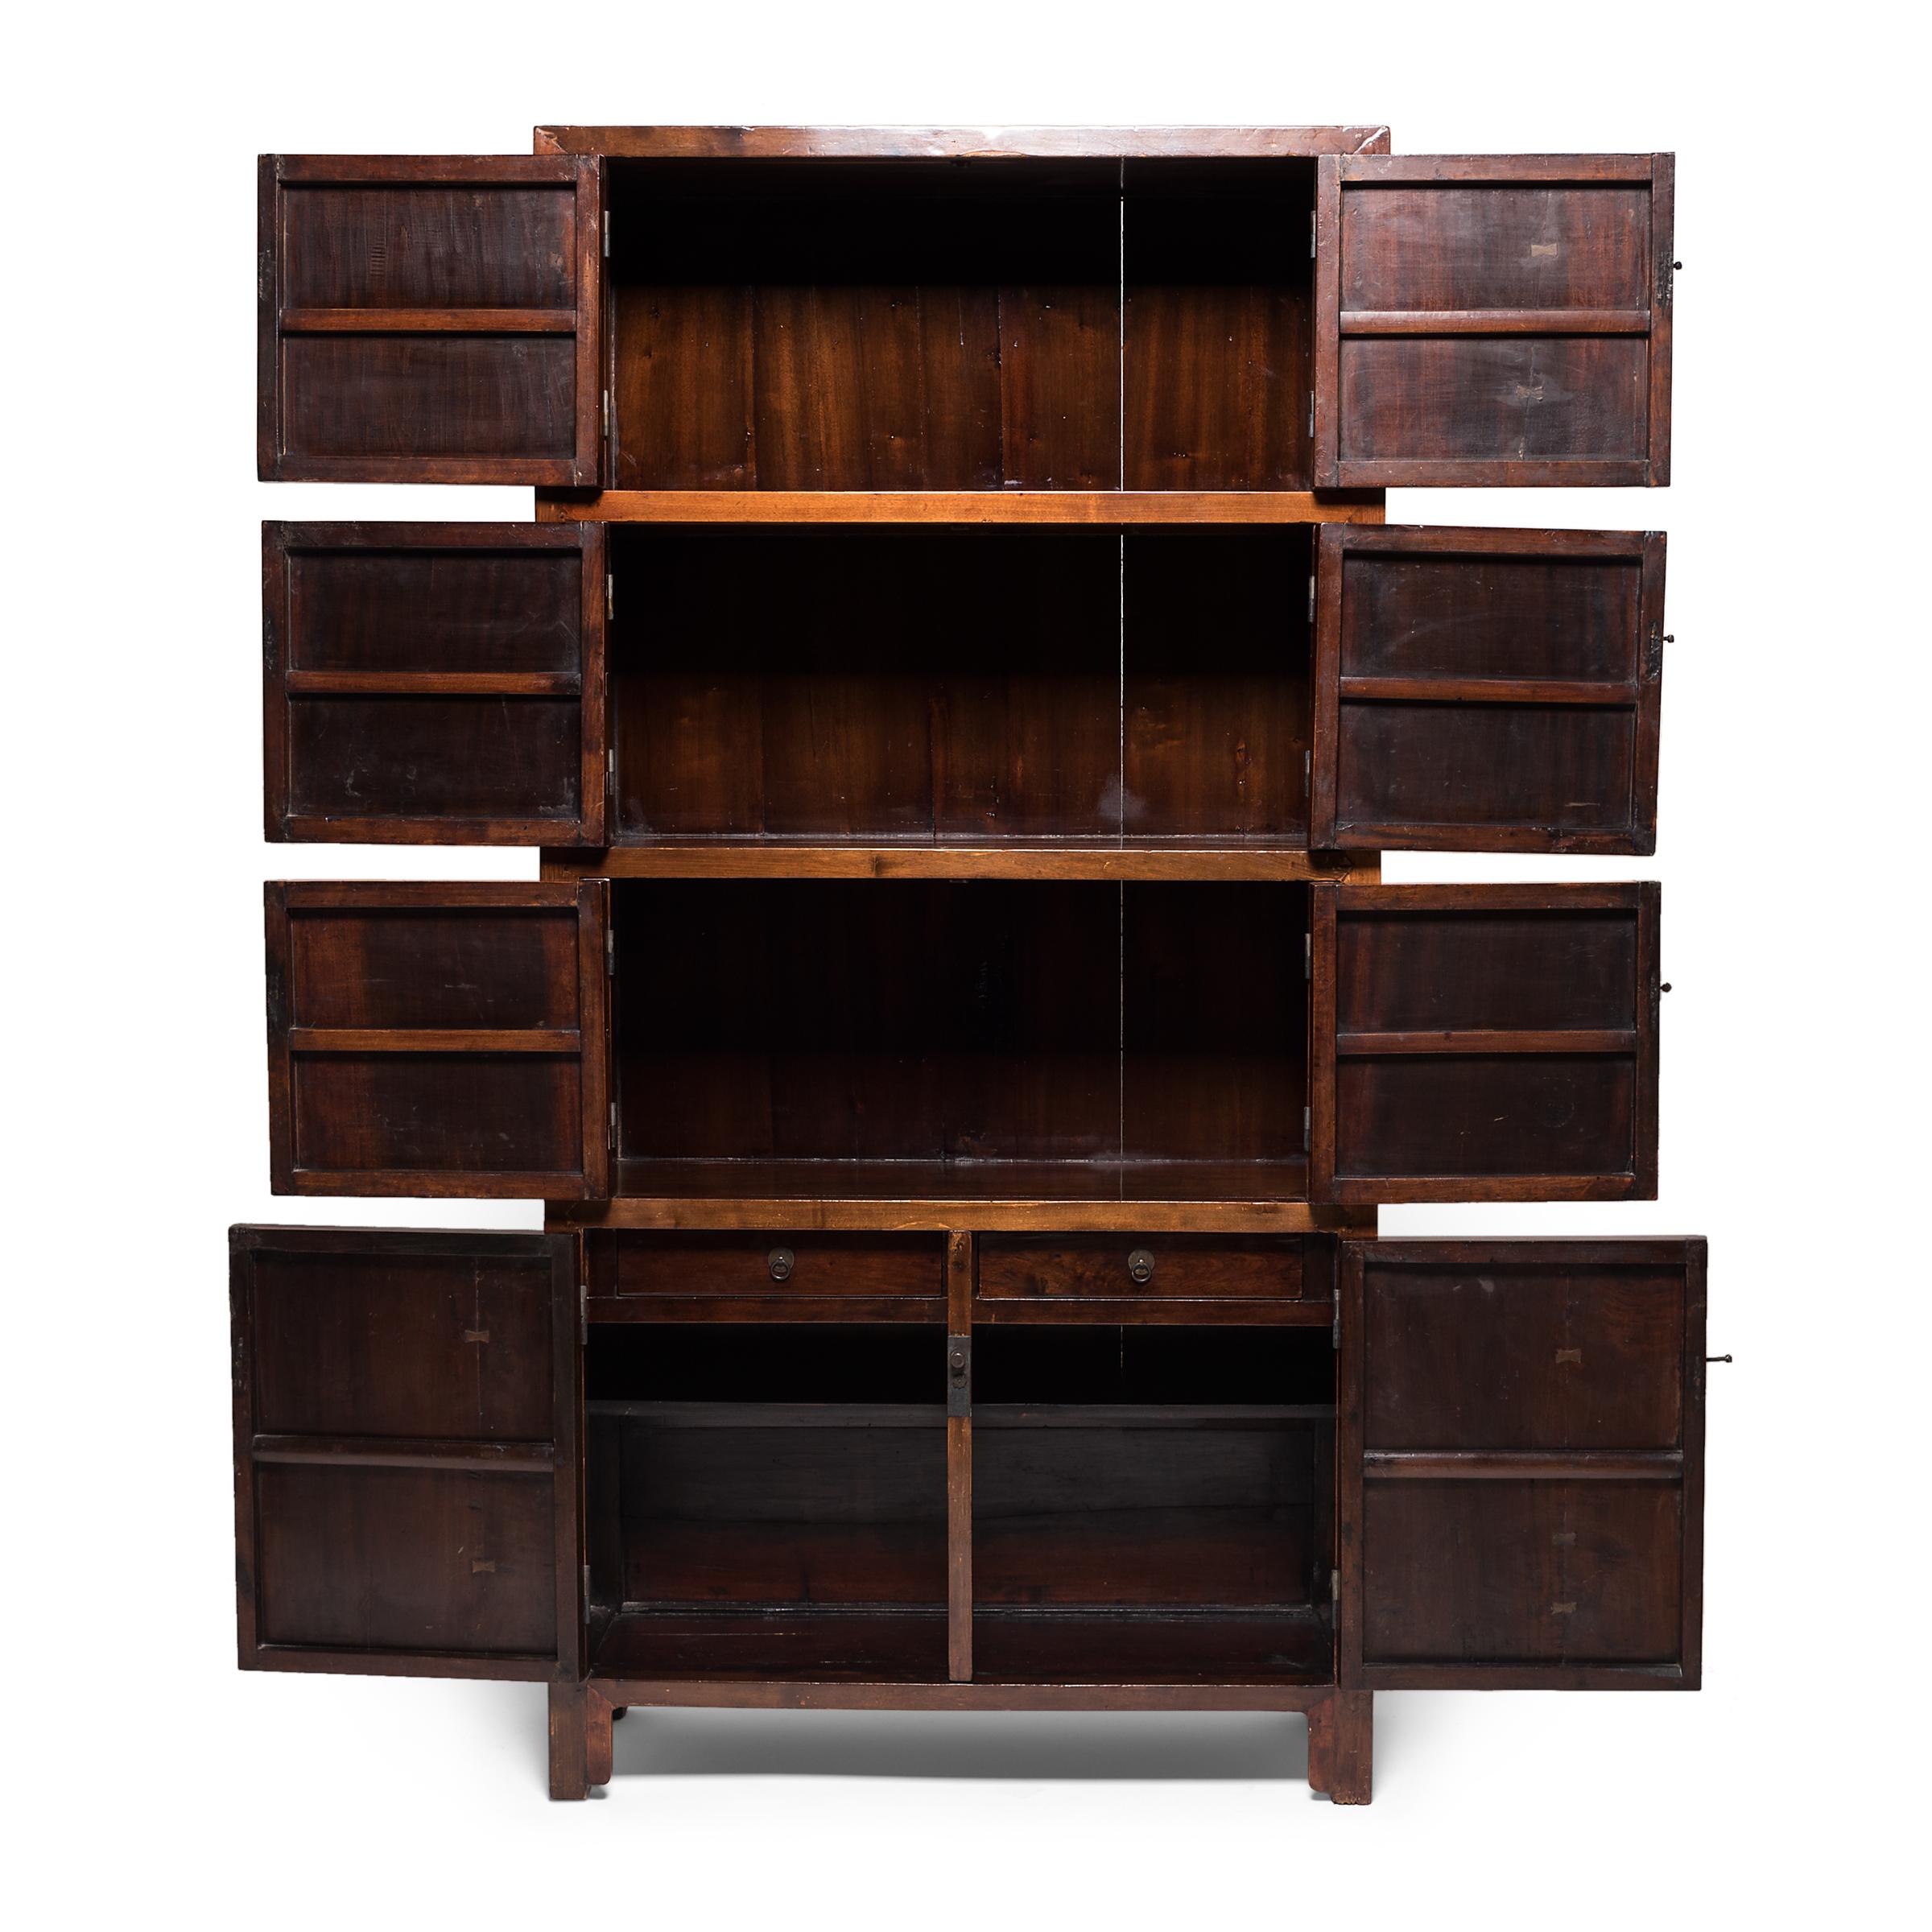 This amazingly versatile cabinet from Suzhou province allows you to easily switched from closed storage to open shelving by removing one or more of its doors. Made circa 1850, the cabinet looks much as it did when it was first built, owing to the